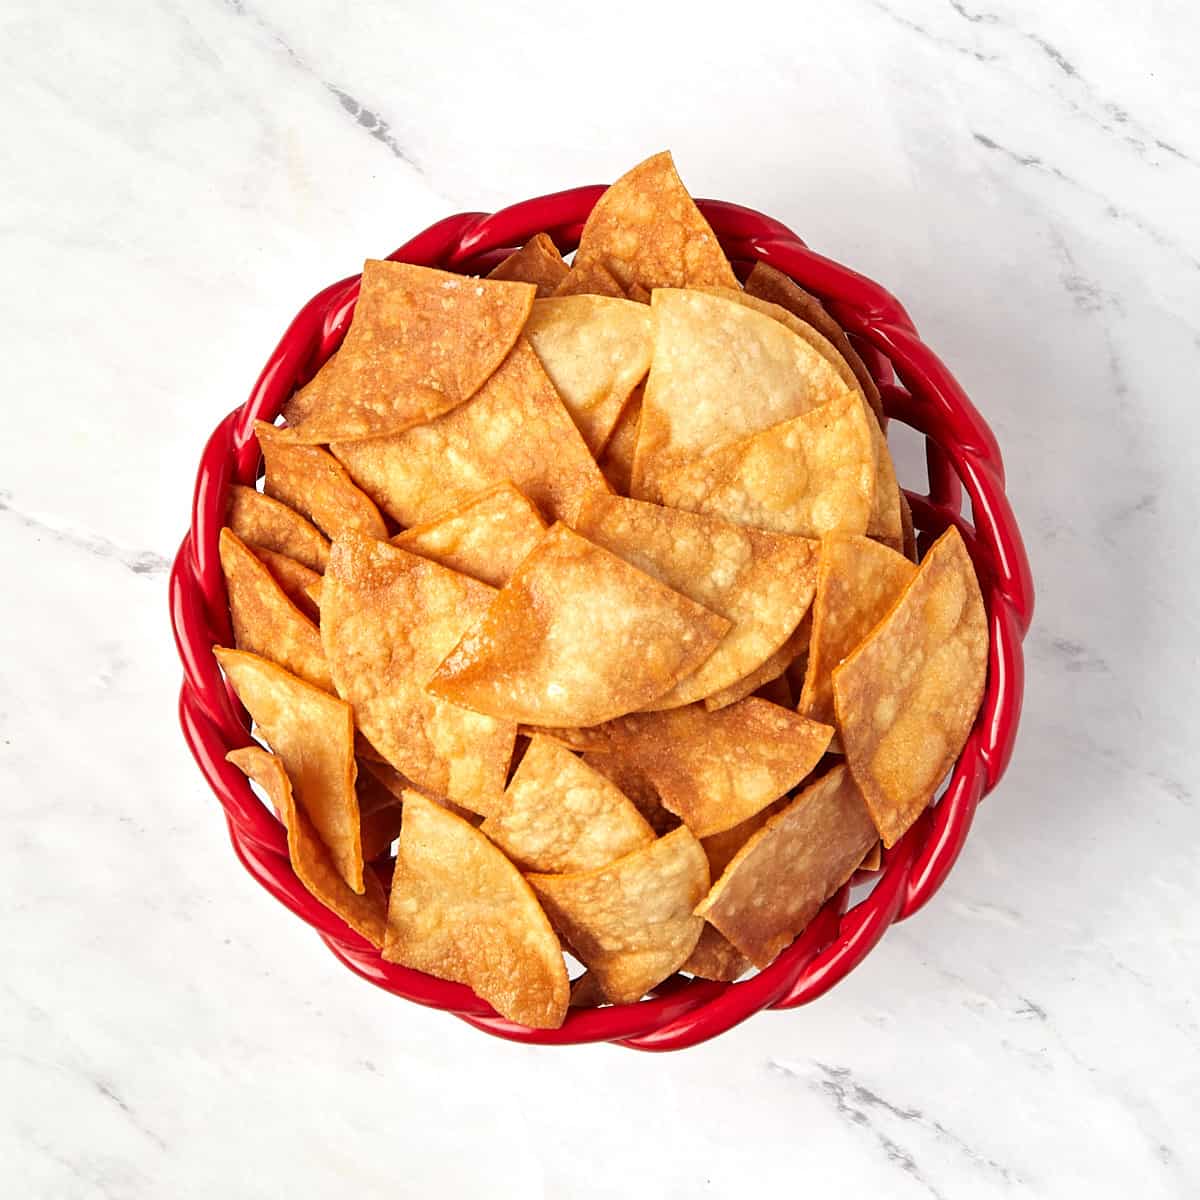 fried tortilla chips in a red bowl